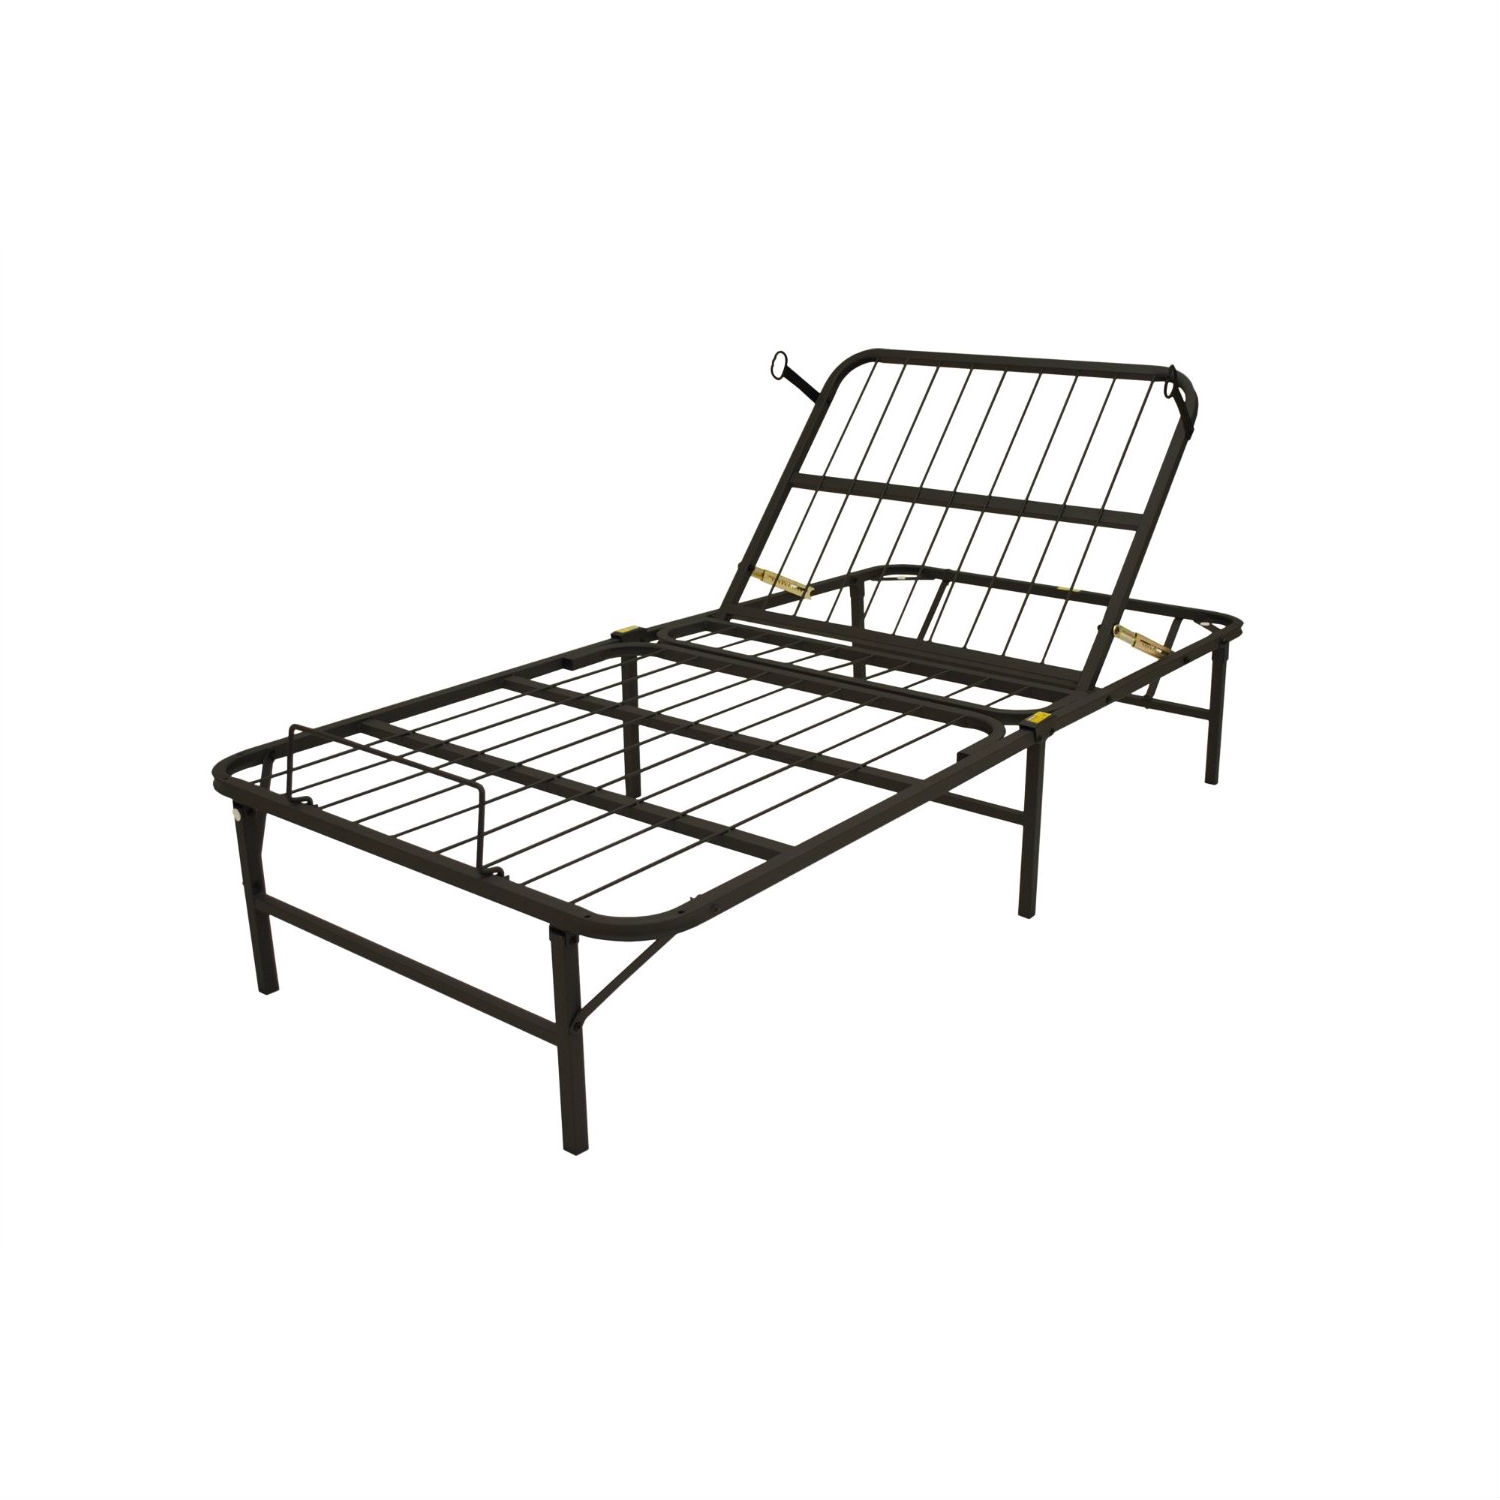 Twin XL Manually Adjustable Bed Frame - Head Adjust Only